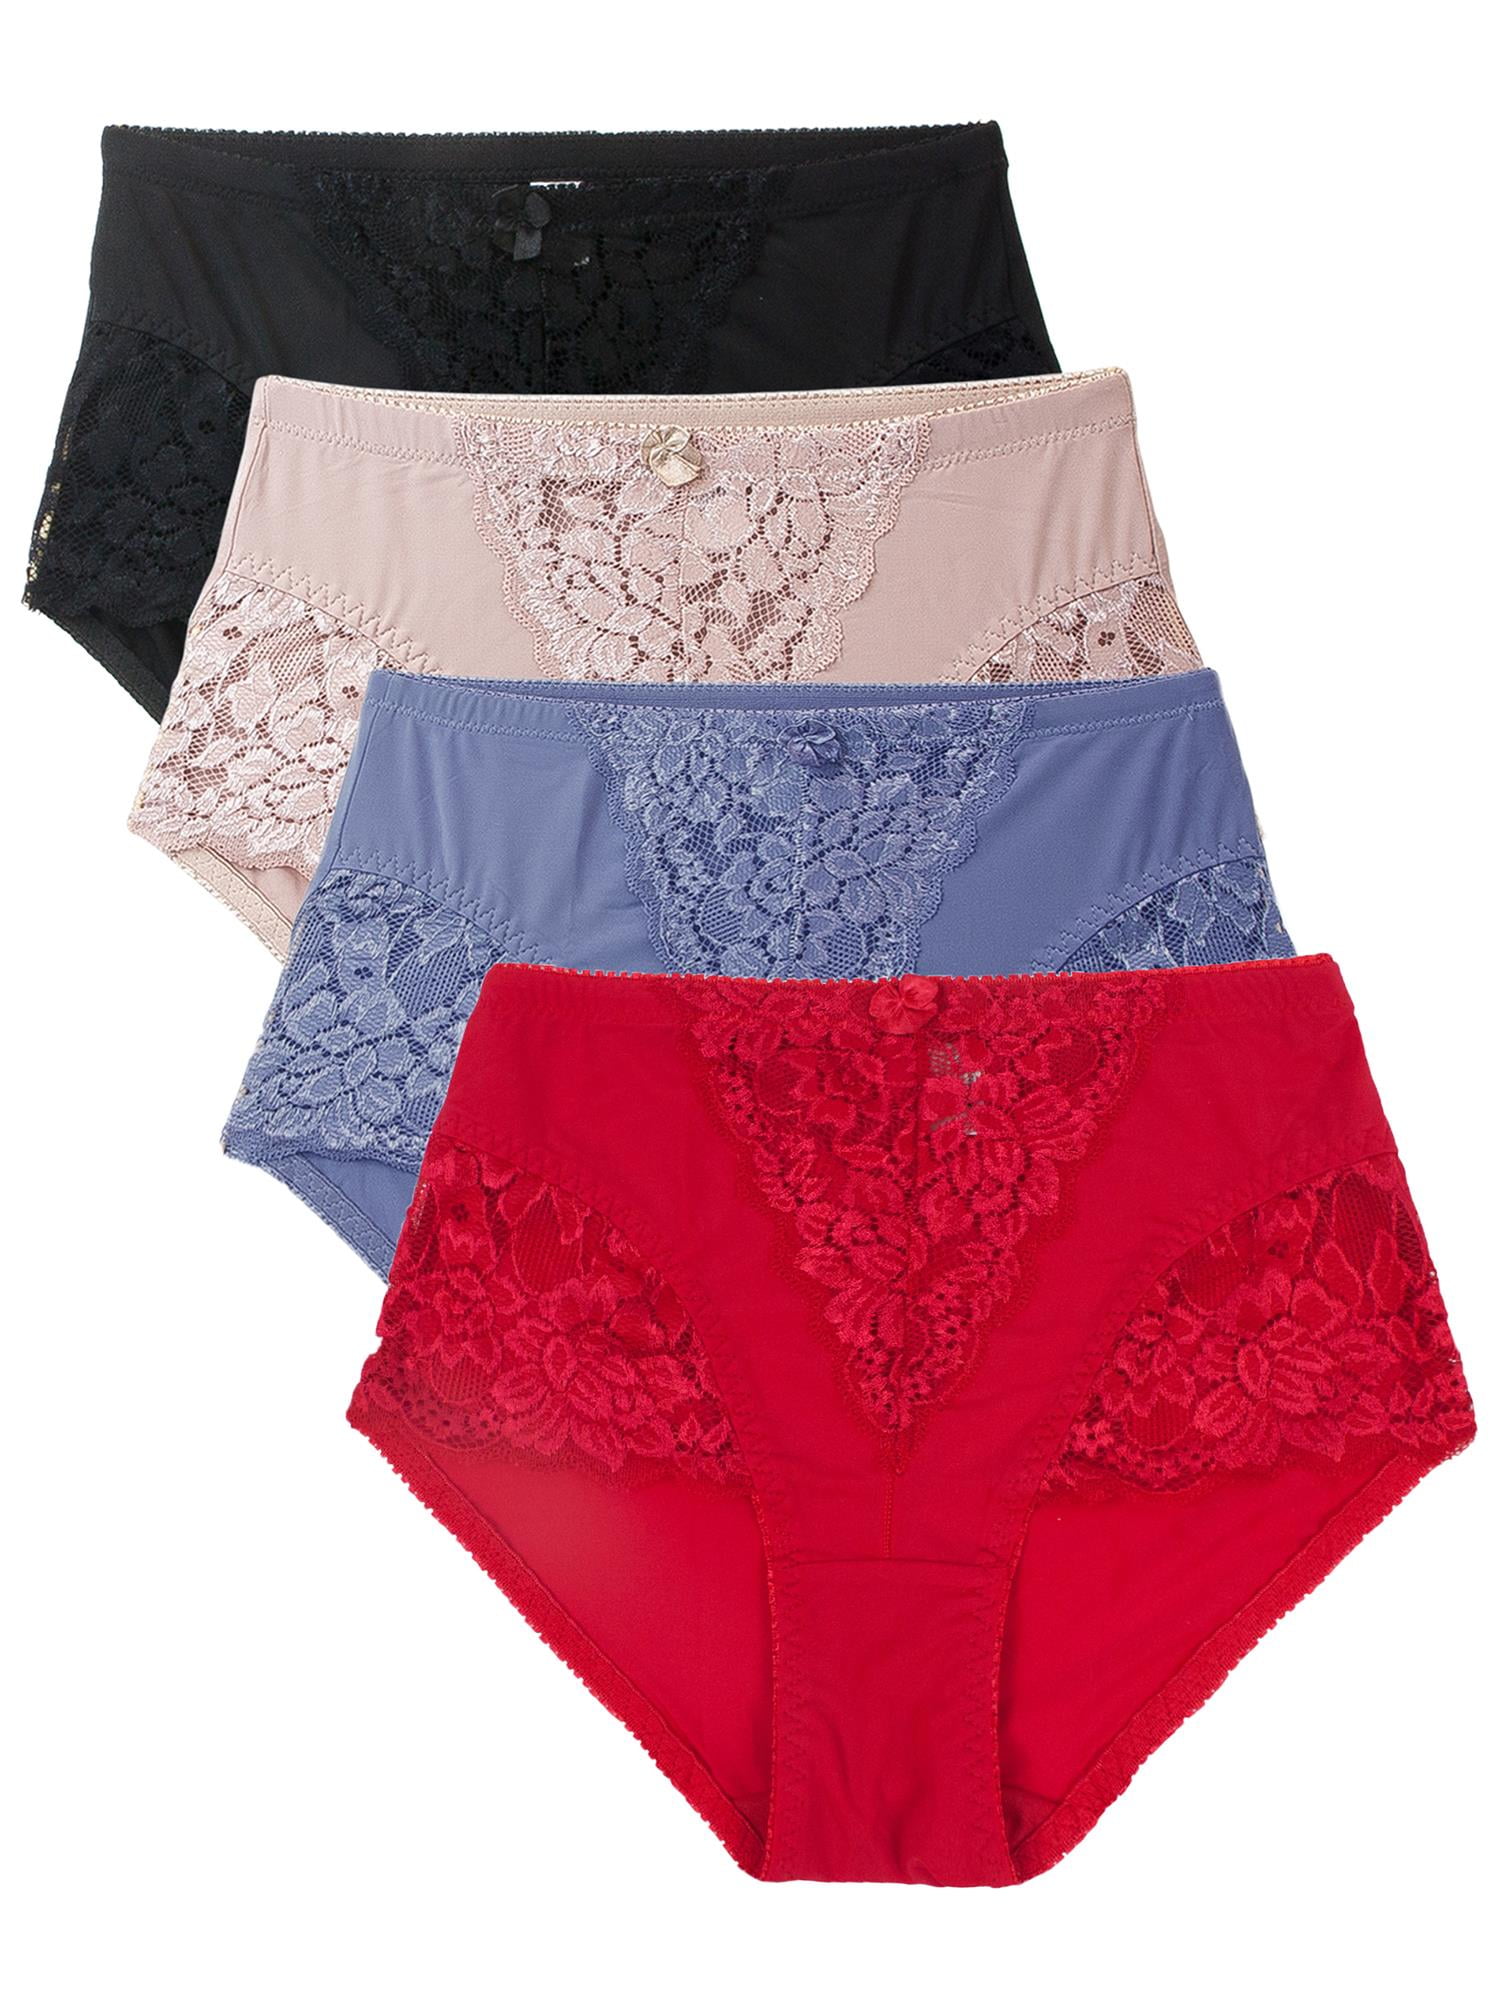 B2BODY Women's Panties Lace High Waisted Briefs Small to Plus